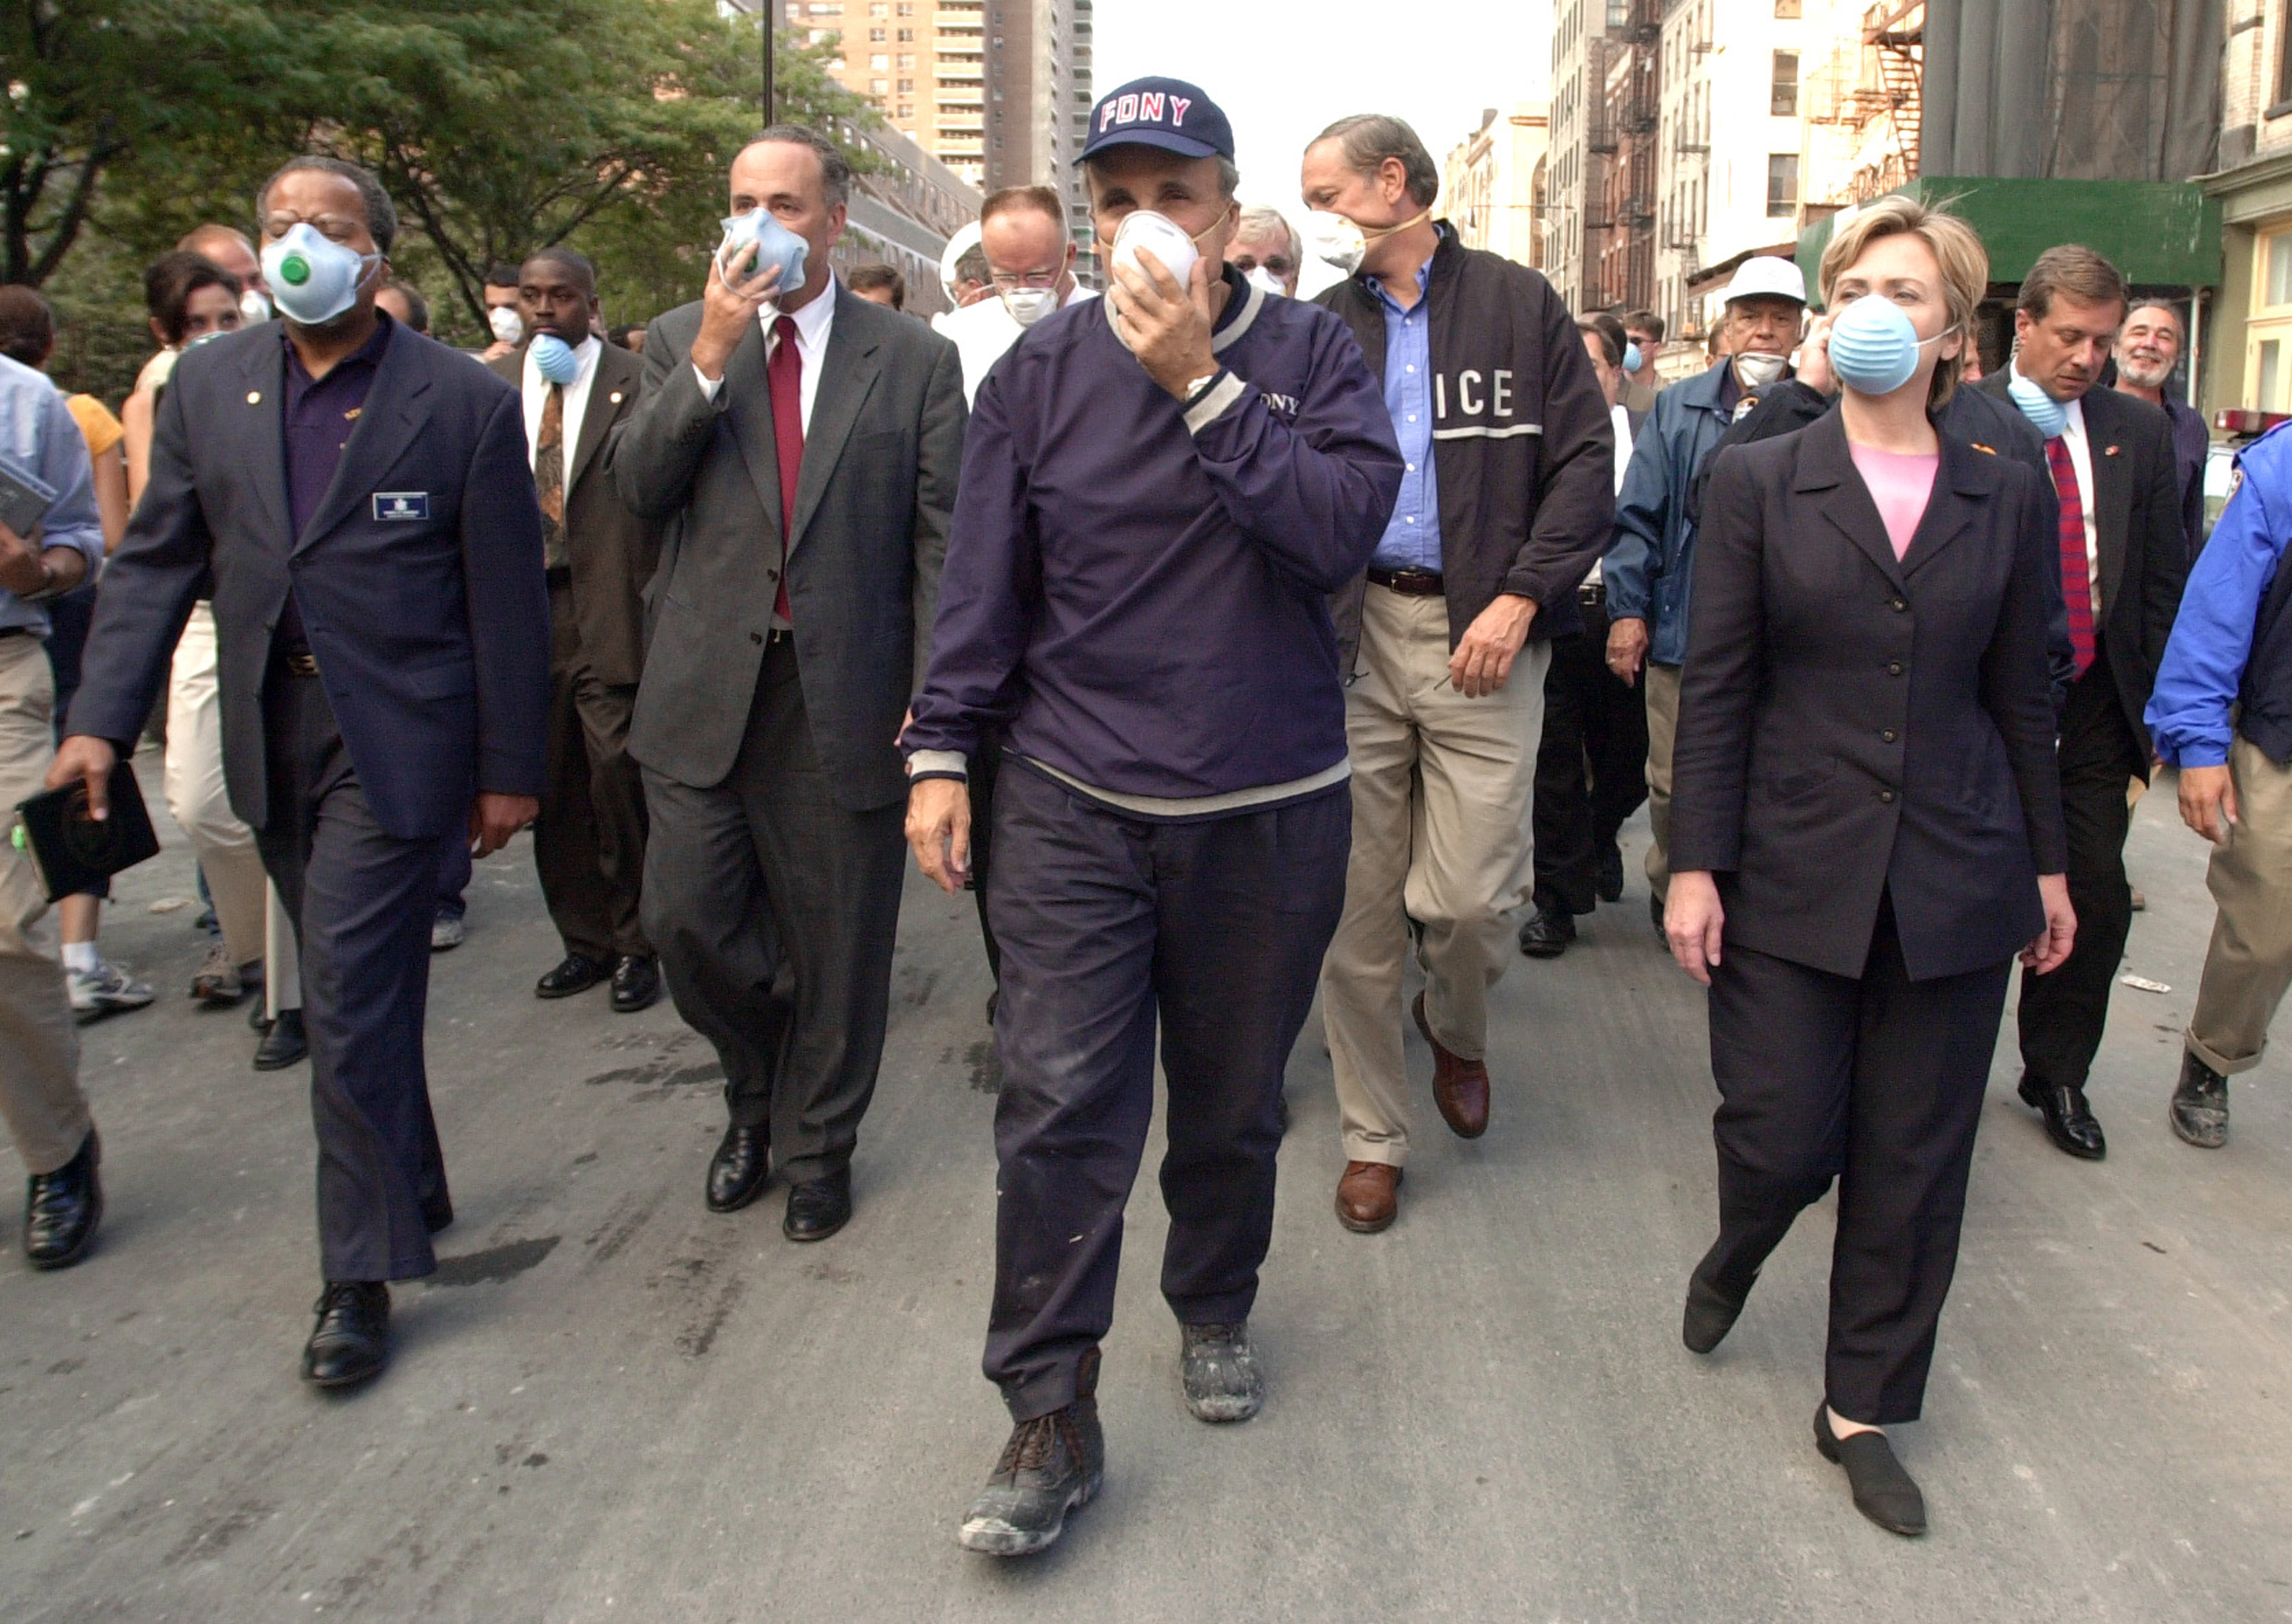 New York City Mayor Rudolph Giuliani (center) leads US Senator Charles Schumer, R-NY (second from left), New York Governor George Pataki (second from right) and US Senator Hillary Rodham Clinton, D-NY (right), on a tour of the site of the World Trade Center disaster in New York on Sept. 12, 2001. (Robert F. Bukaty—AFP/Getty Images)